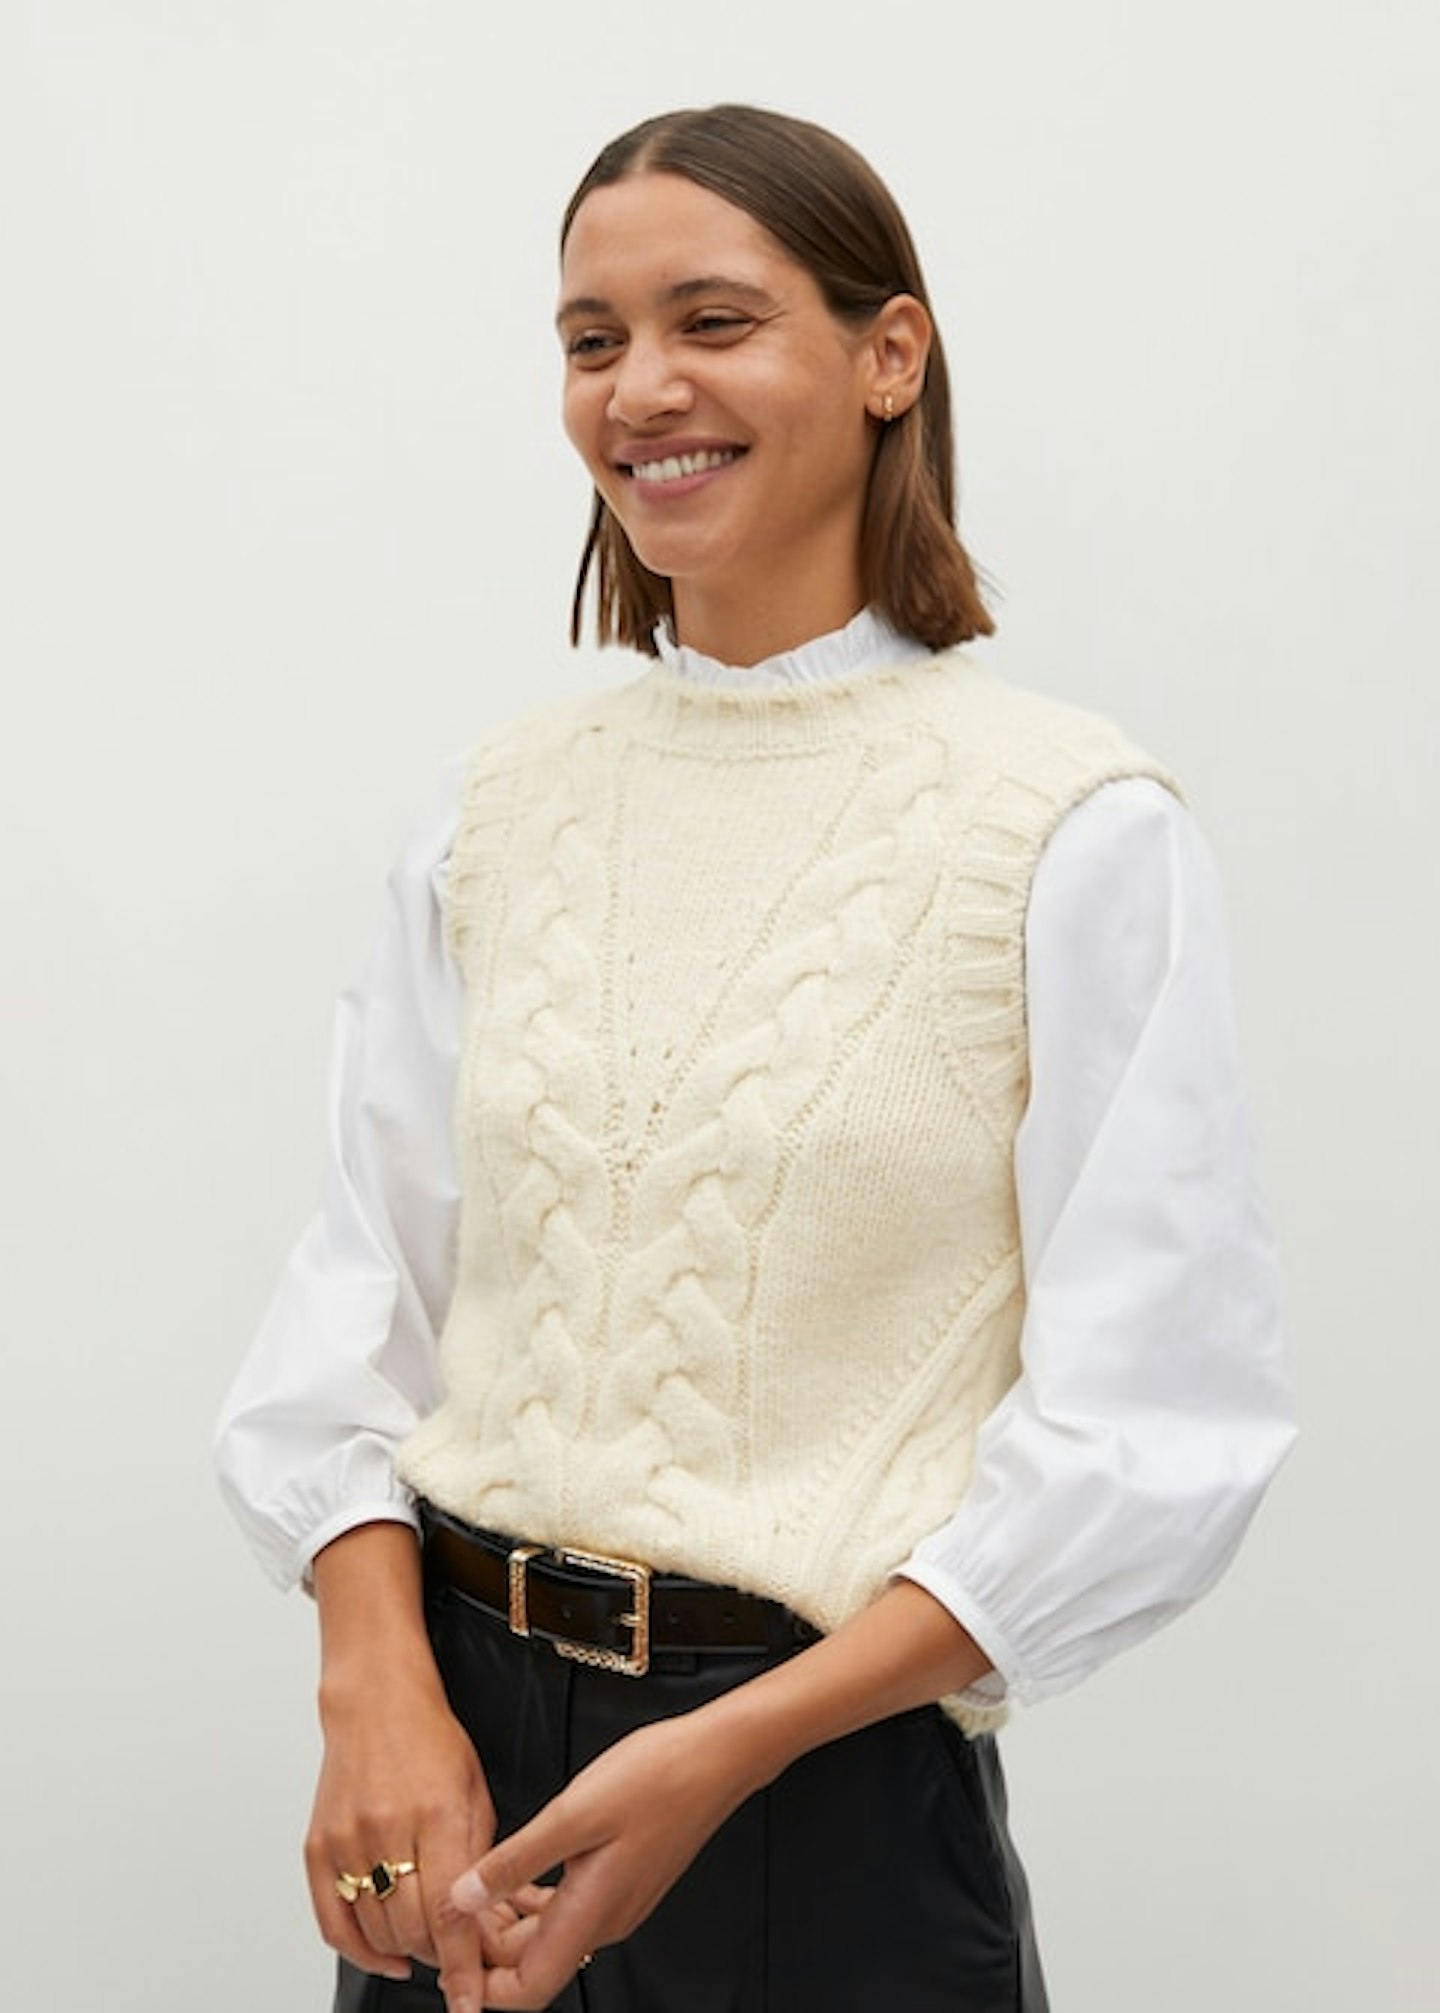 The Best Knitted Vests And Lightweight Cardigans To Wear Now